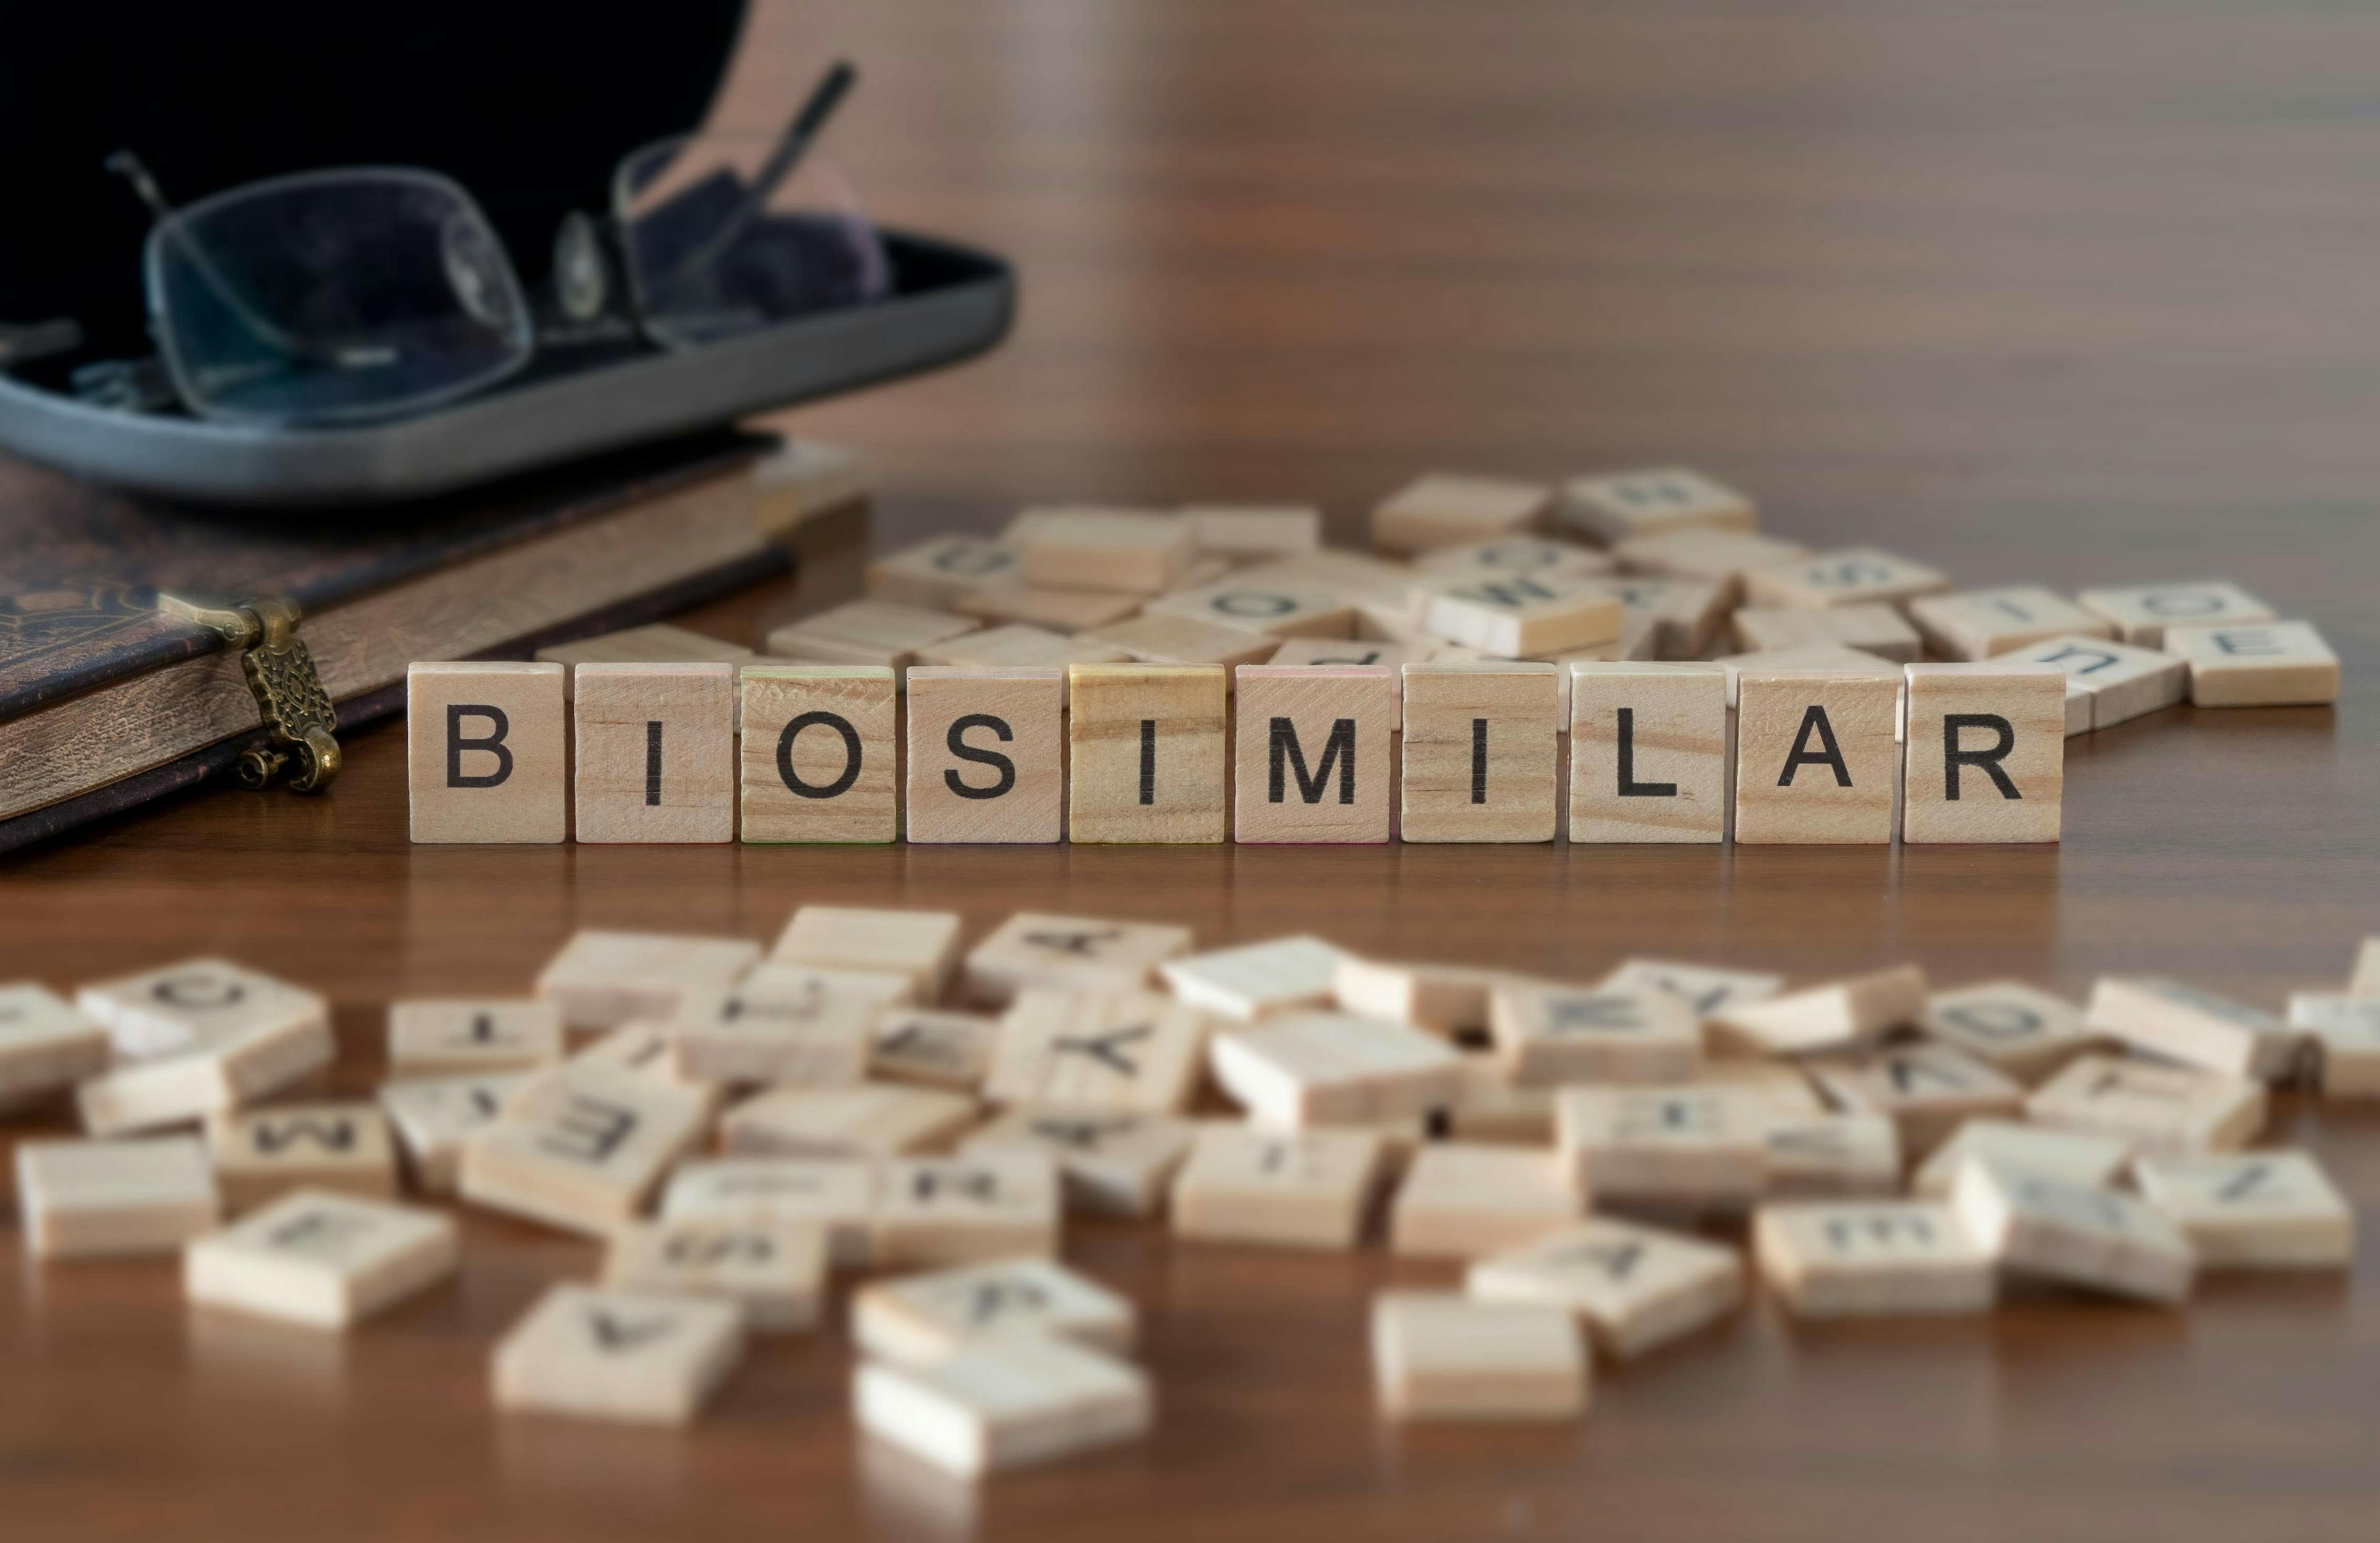 The word "biosimilar" represented by wooden letter tiles on a wooden table with glasses and a book.